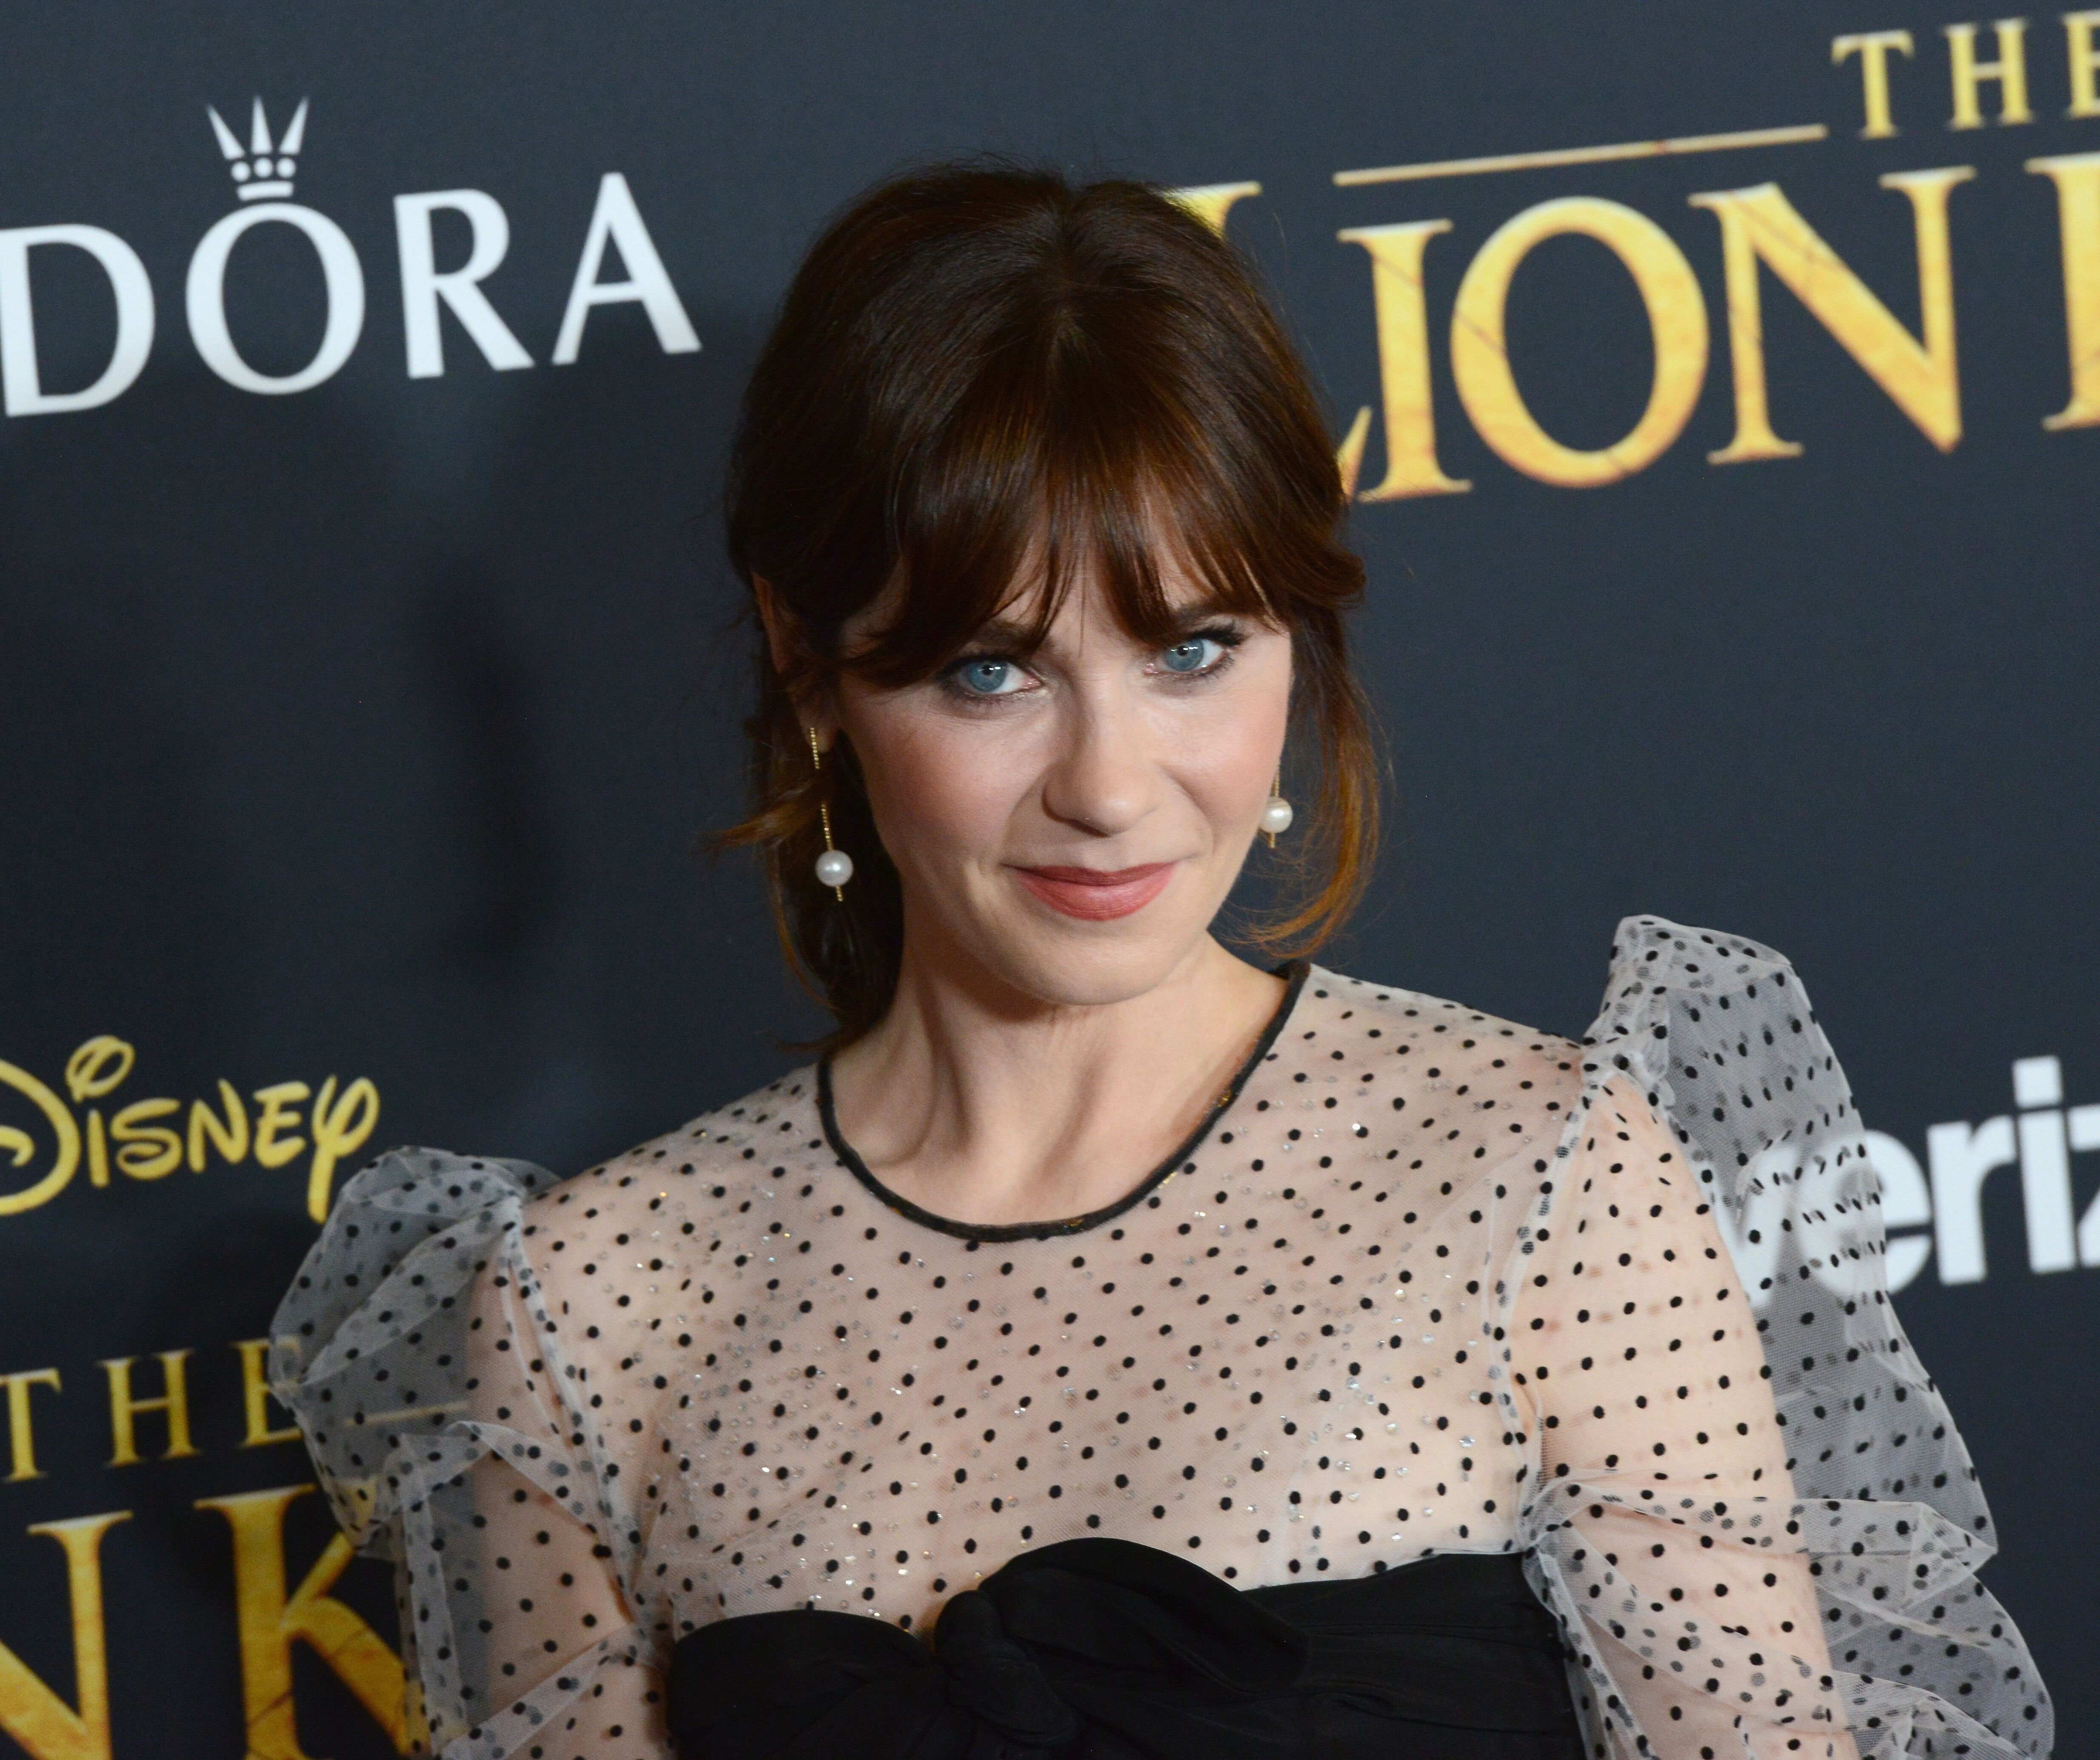 Zooey Deschanel at the The Lion King premiere held at Dolby Theatre on July 9, 2019, in Hollywood, California | Photo: Albert L. Ortega/Getty Images